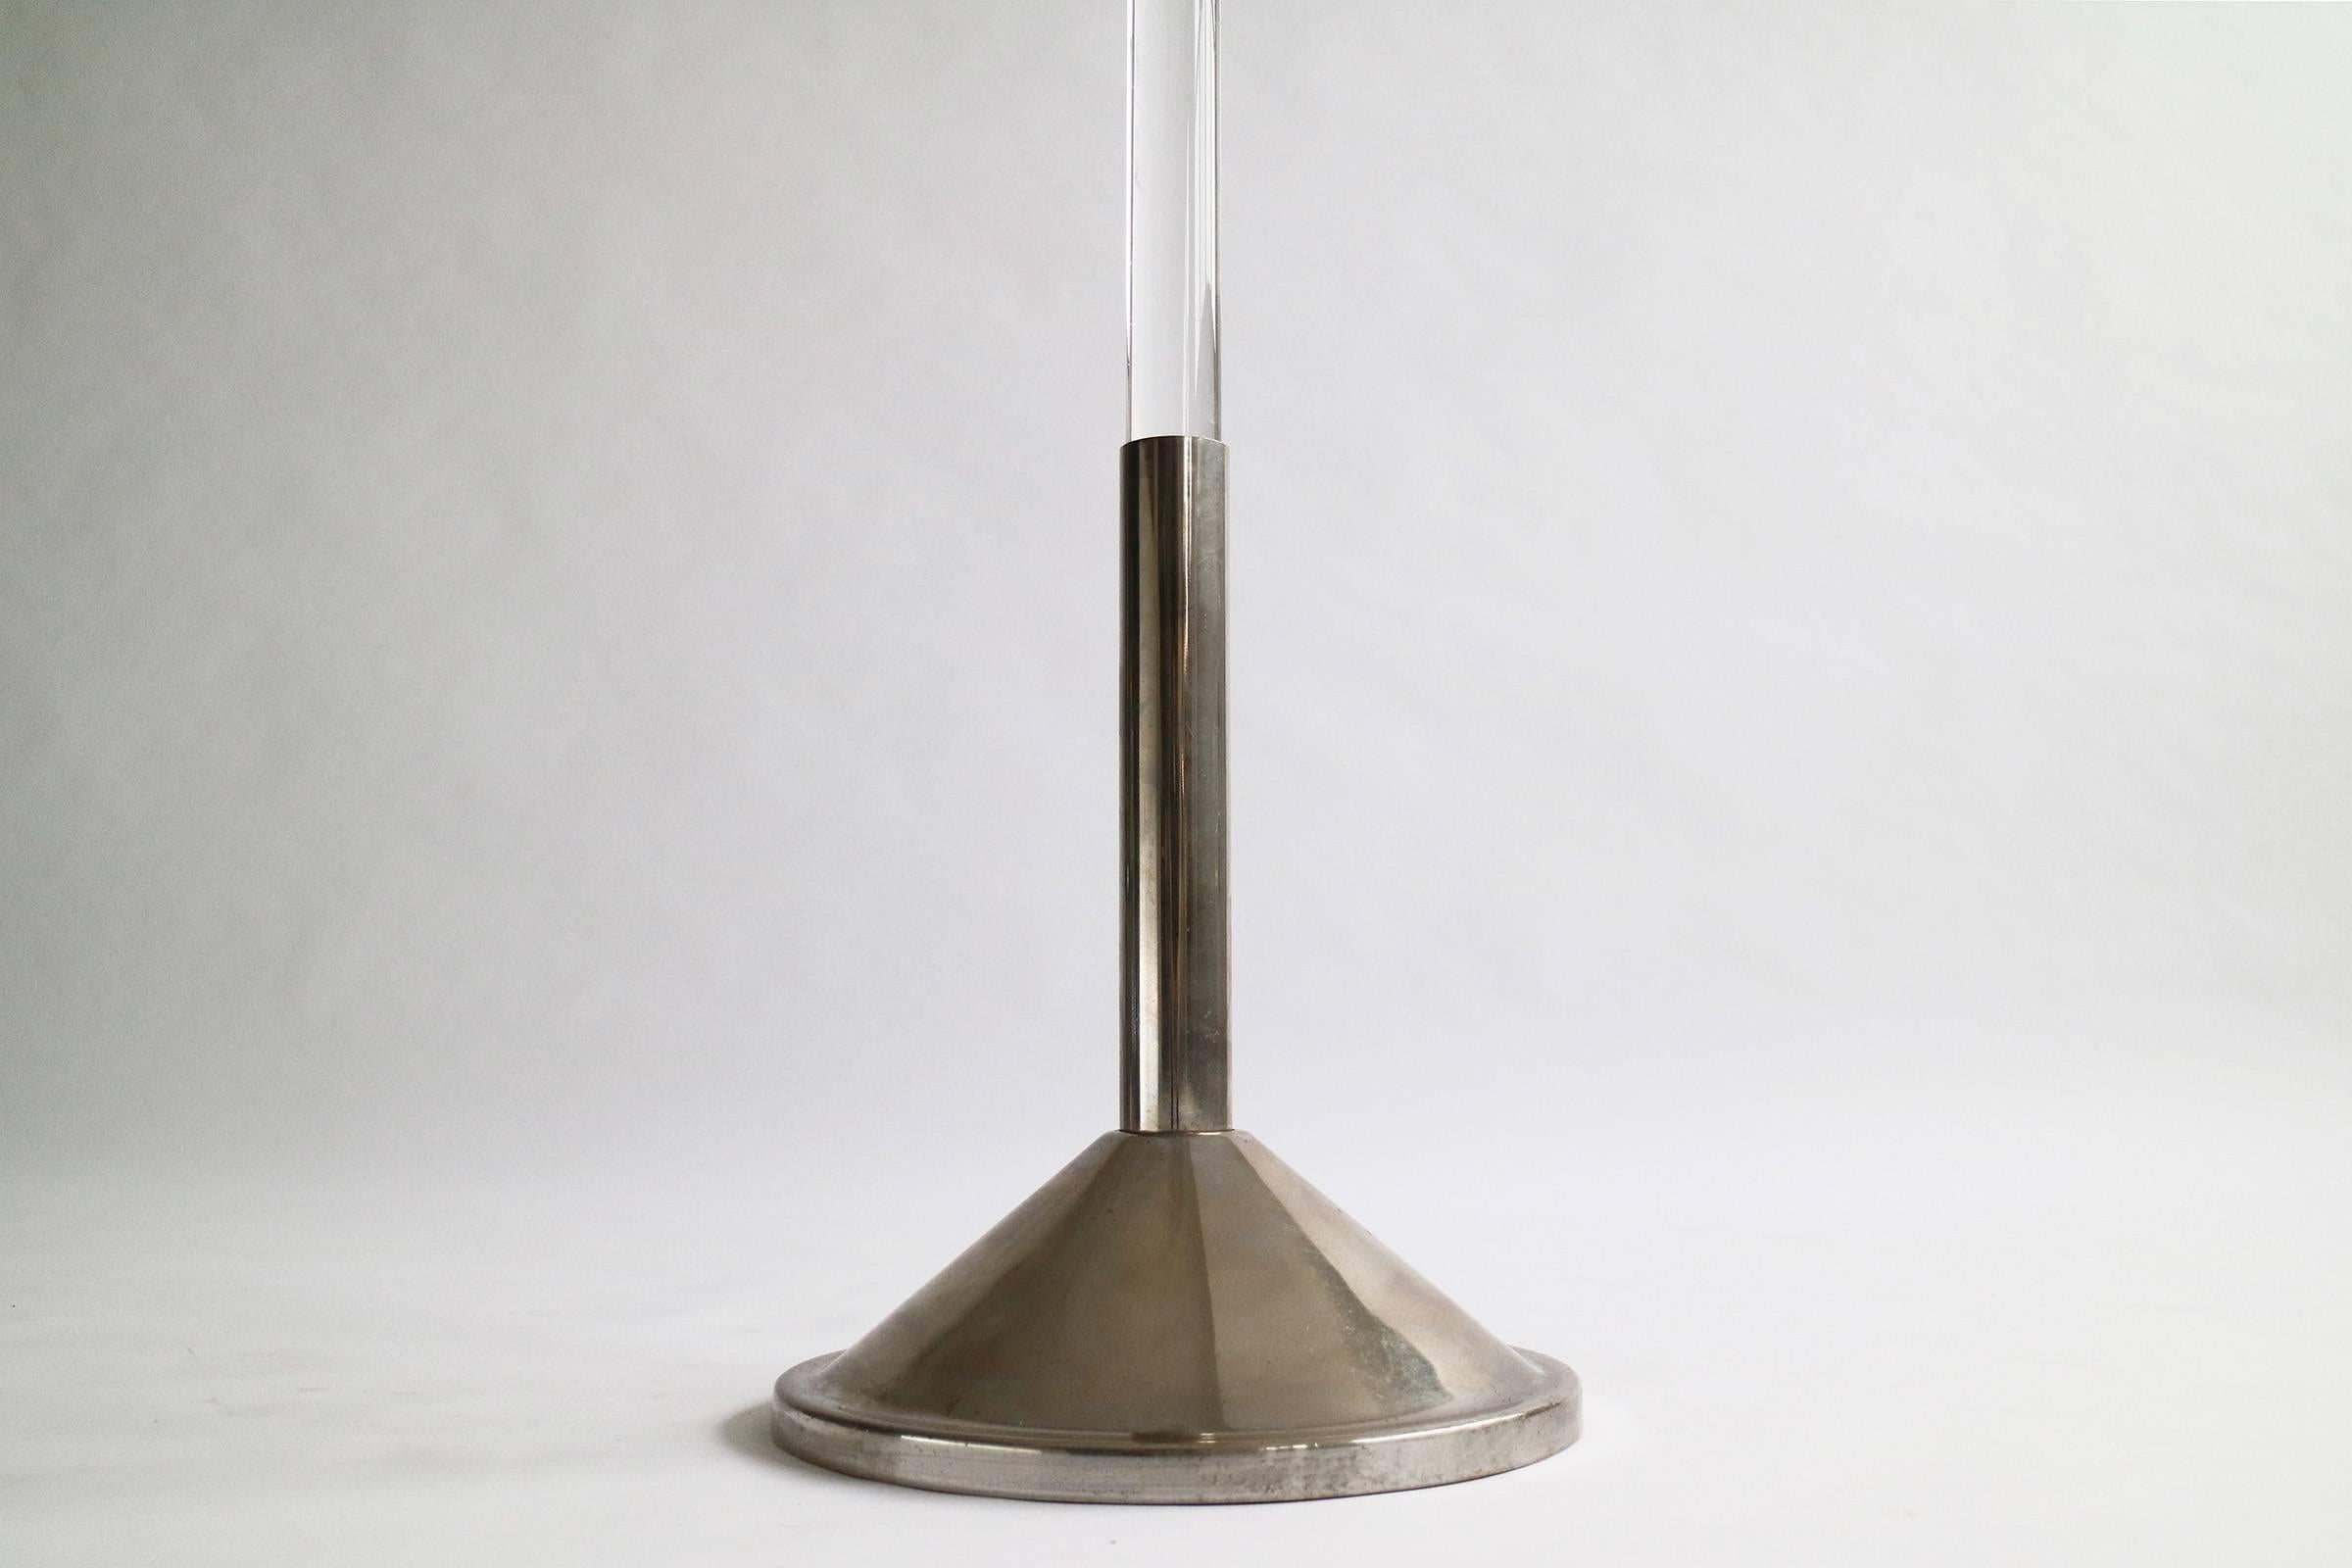 Swivel-Arm Coat Stand from Showroom in Rome, Italy
Lucite and chrome plated steel. 